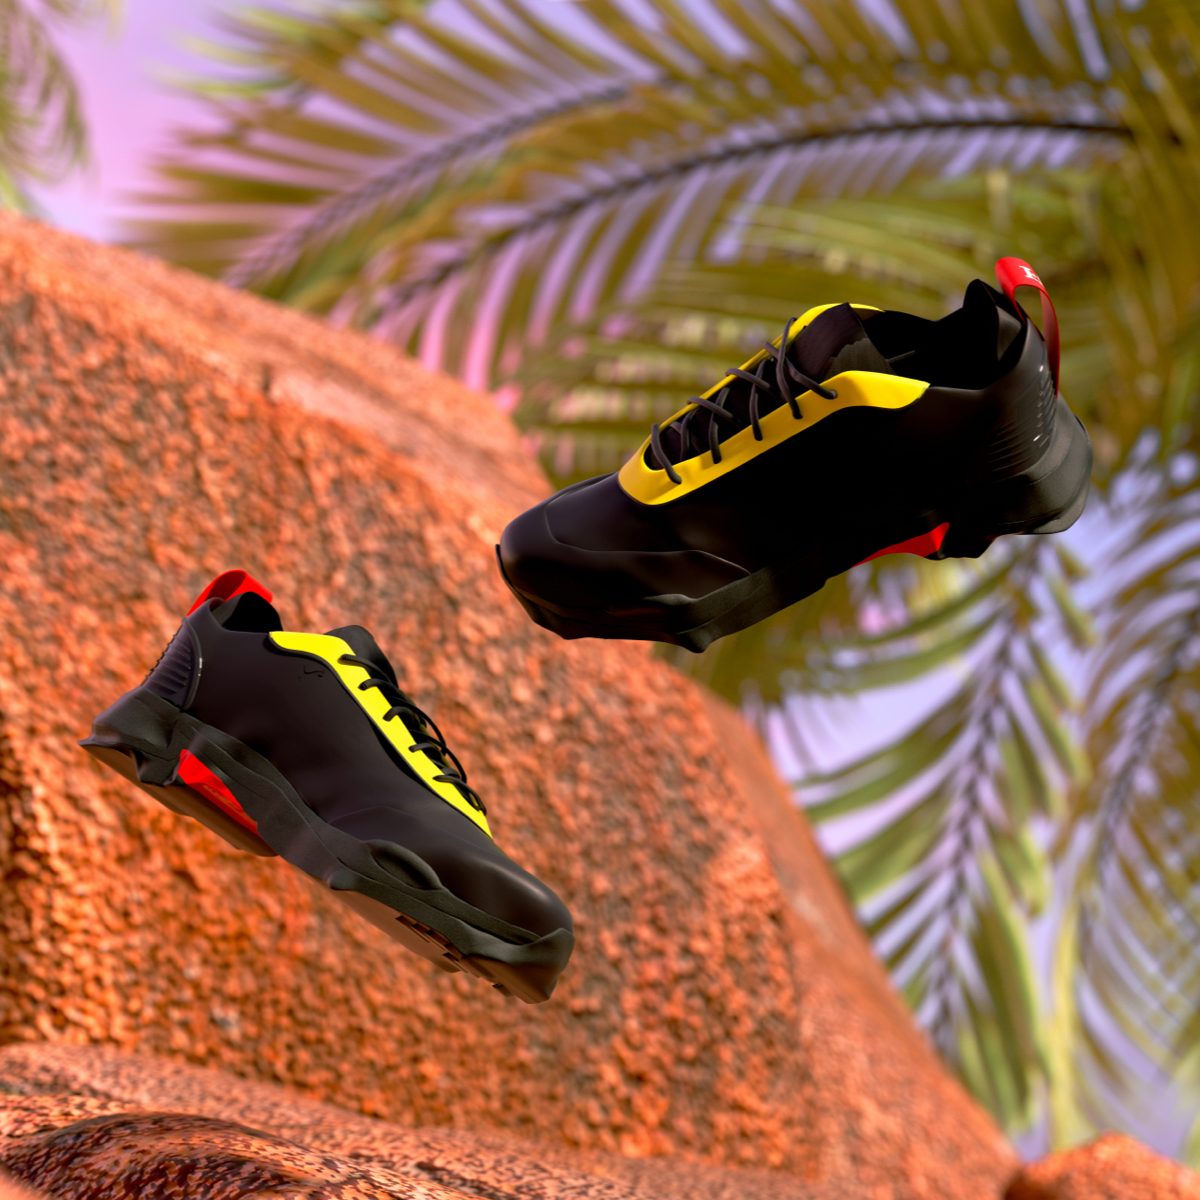 Black Nitefox sneakers suspended in the air with palms and rocks in the background